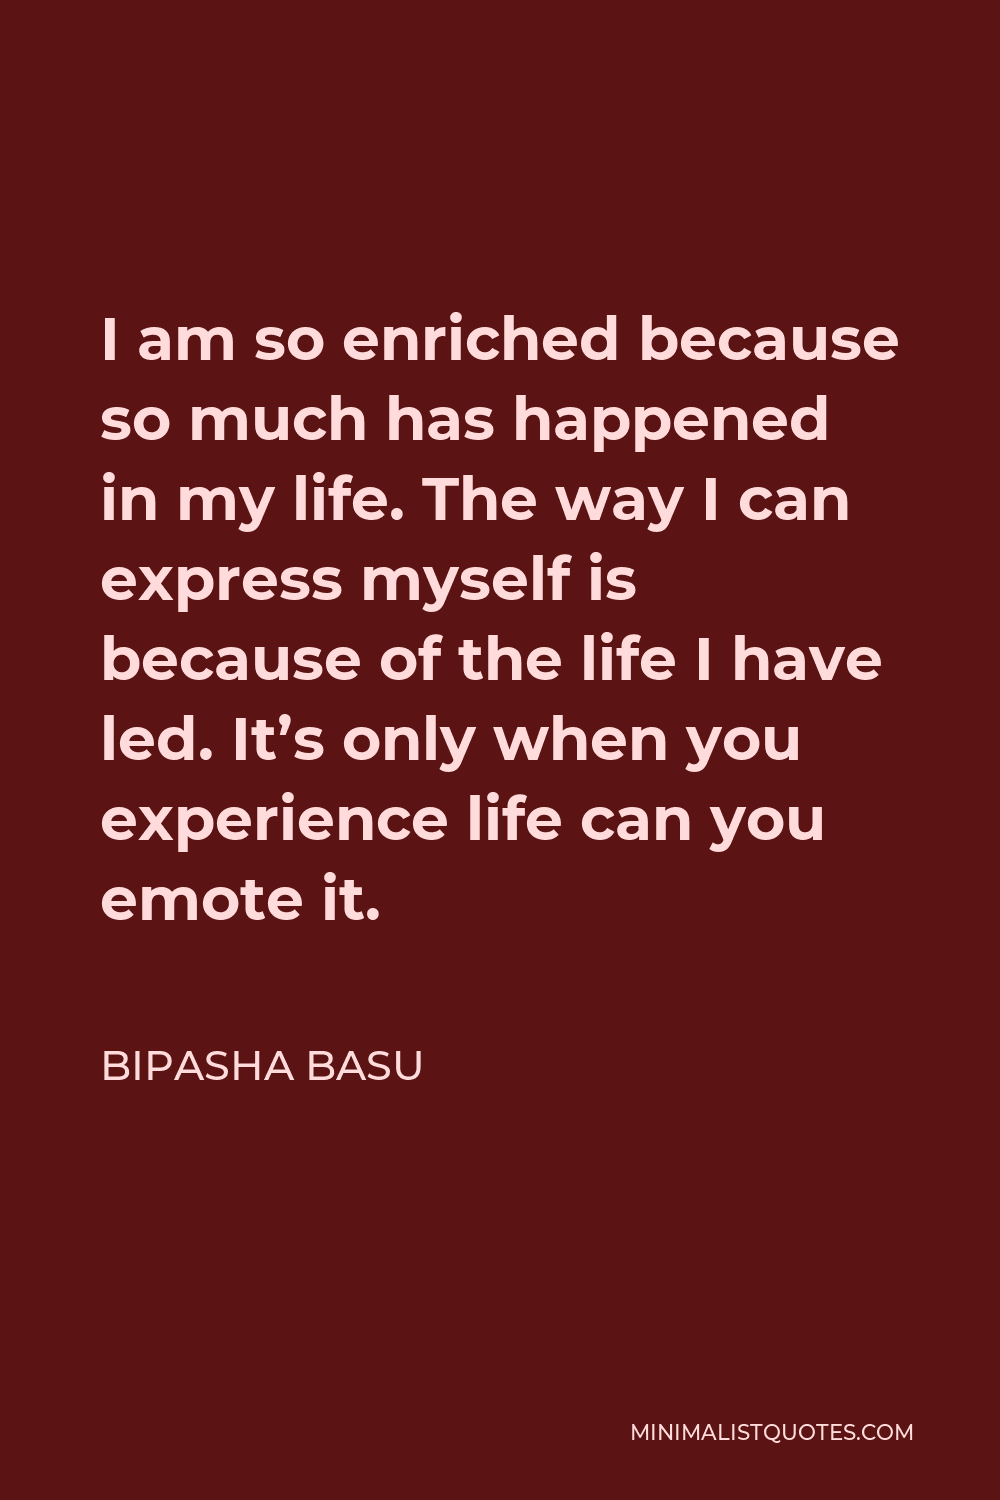 Bipasha Basu Quote - I am so enriched because so much has happened in my life. The way I can express myself is because of the life I have led. It’s only when you experience life can you emote it.